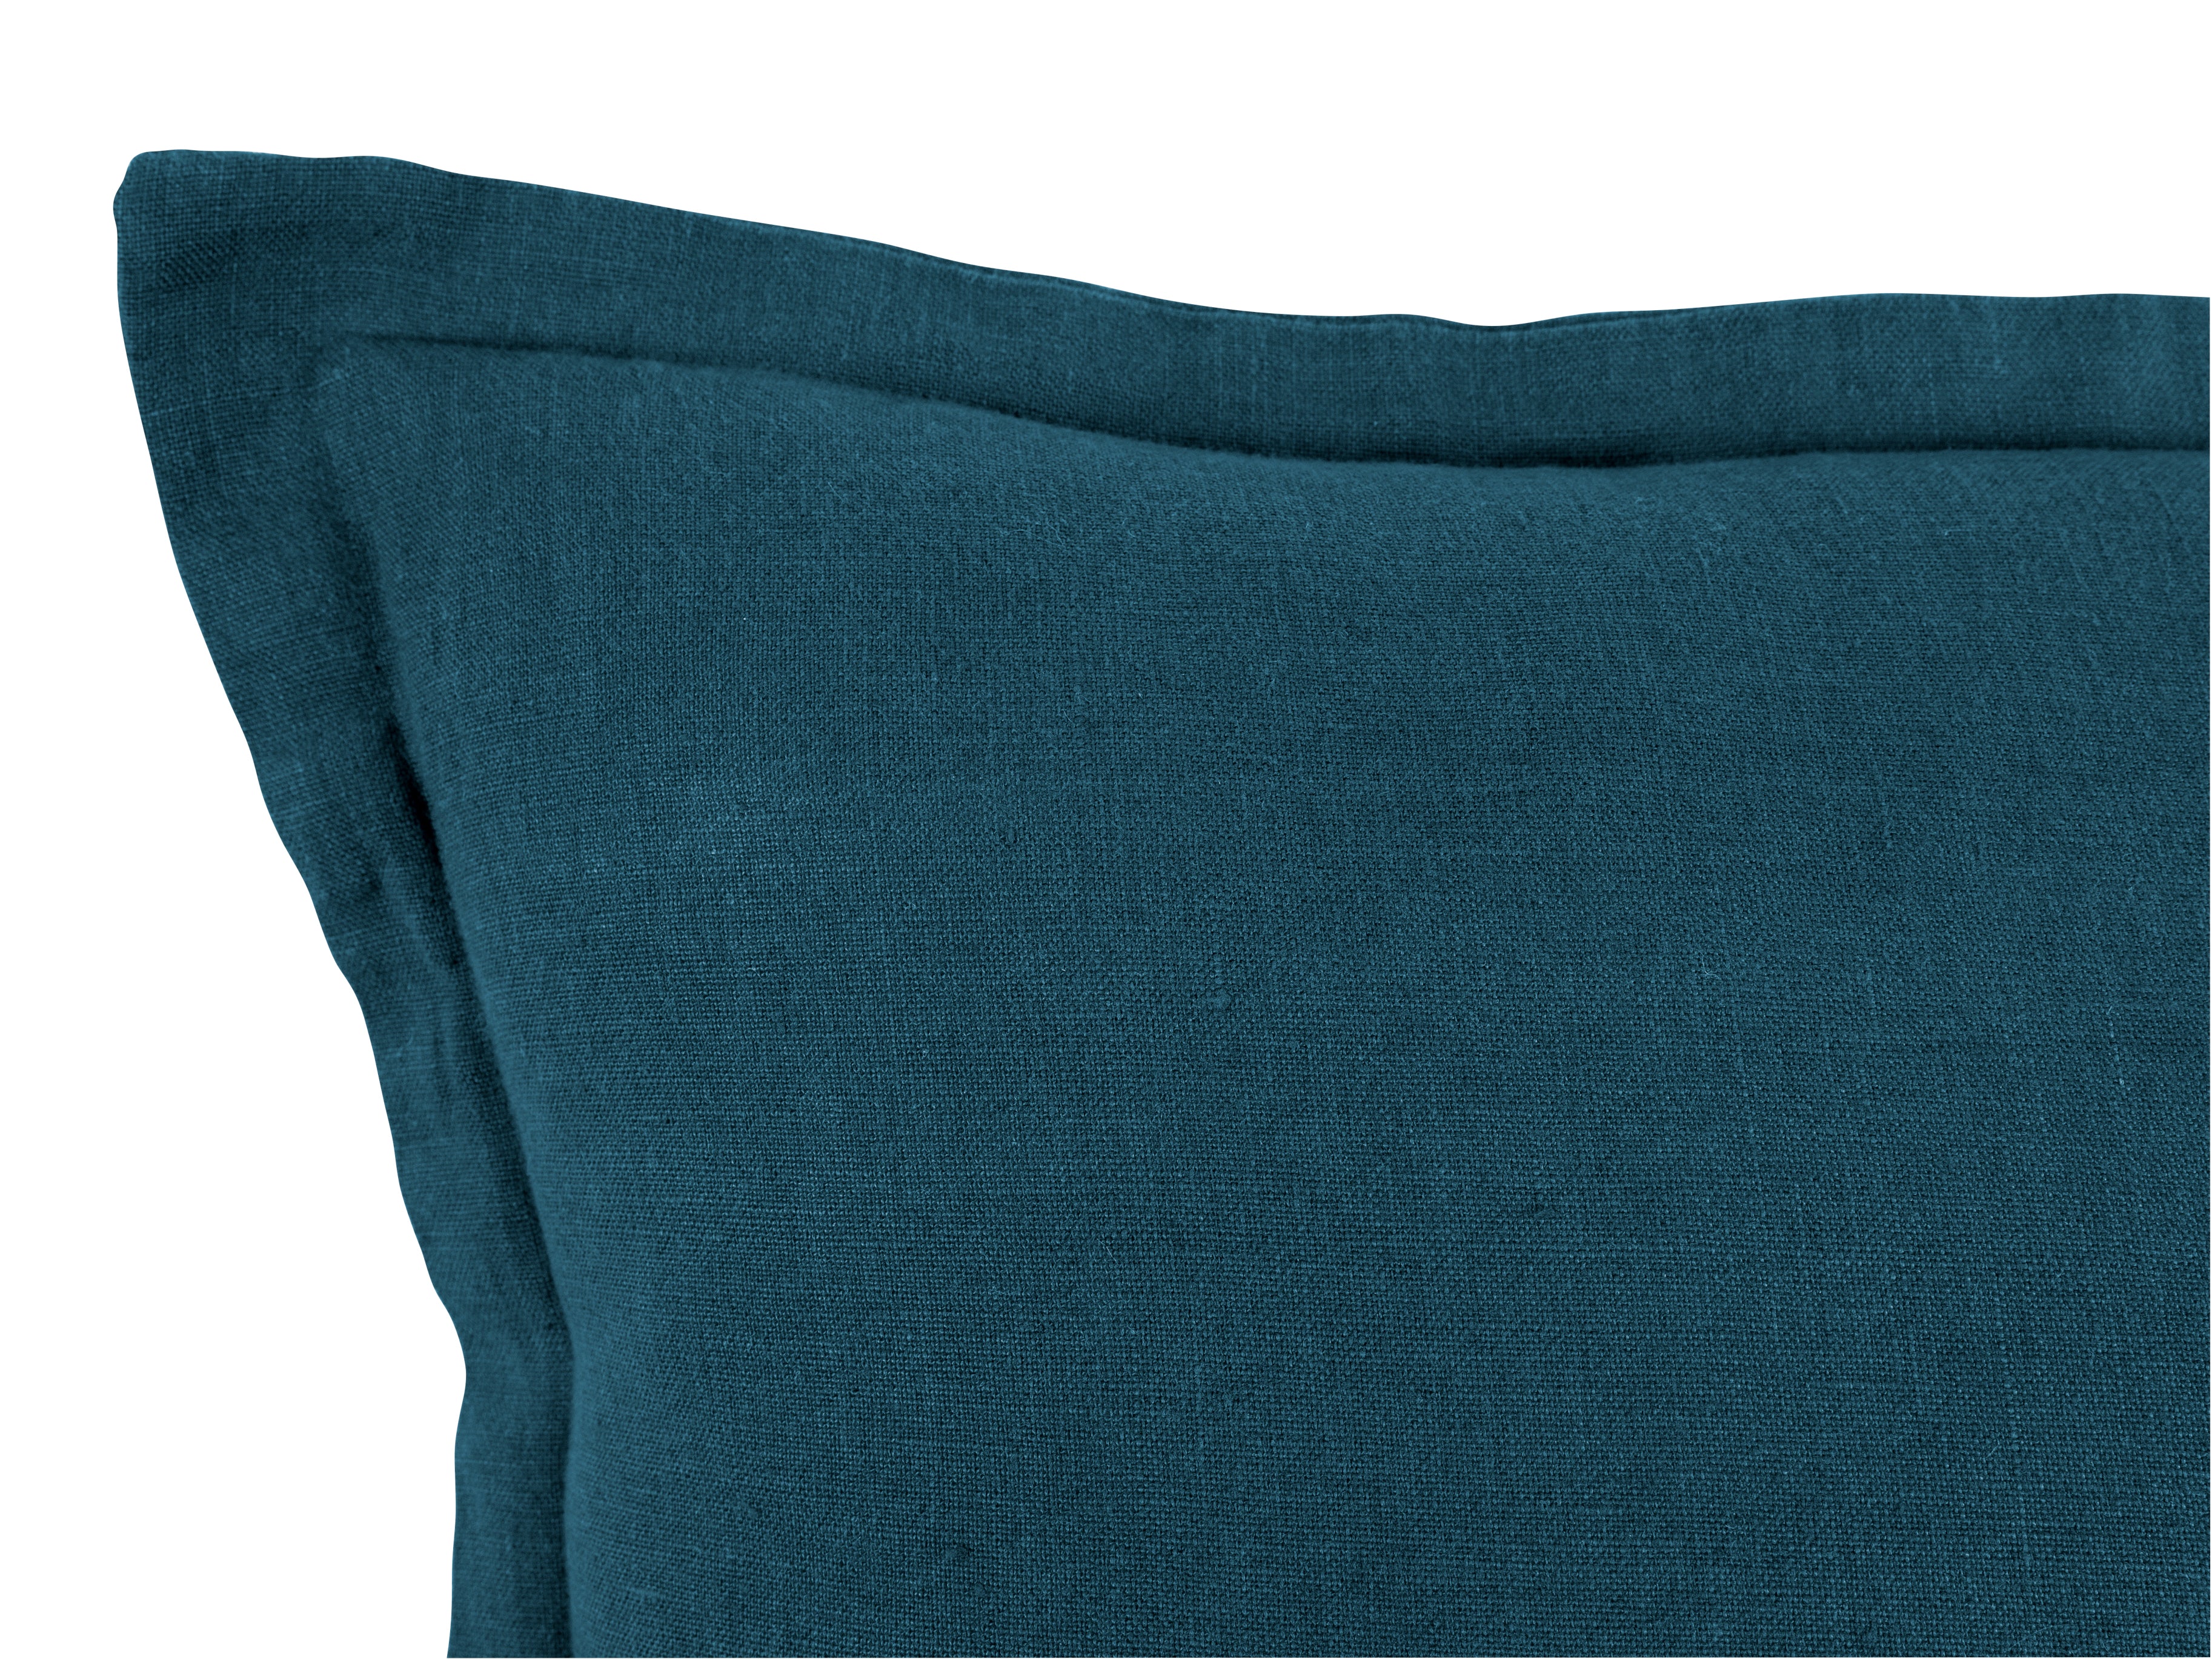 Washed Linen with Flange Decorative Pillow